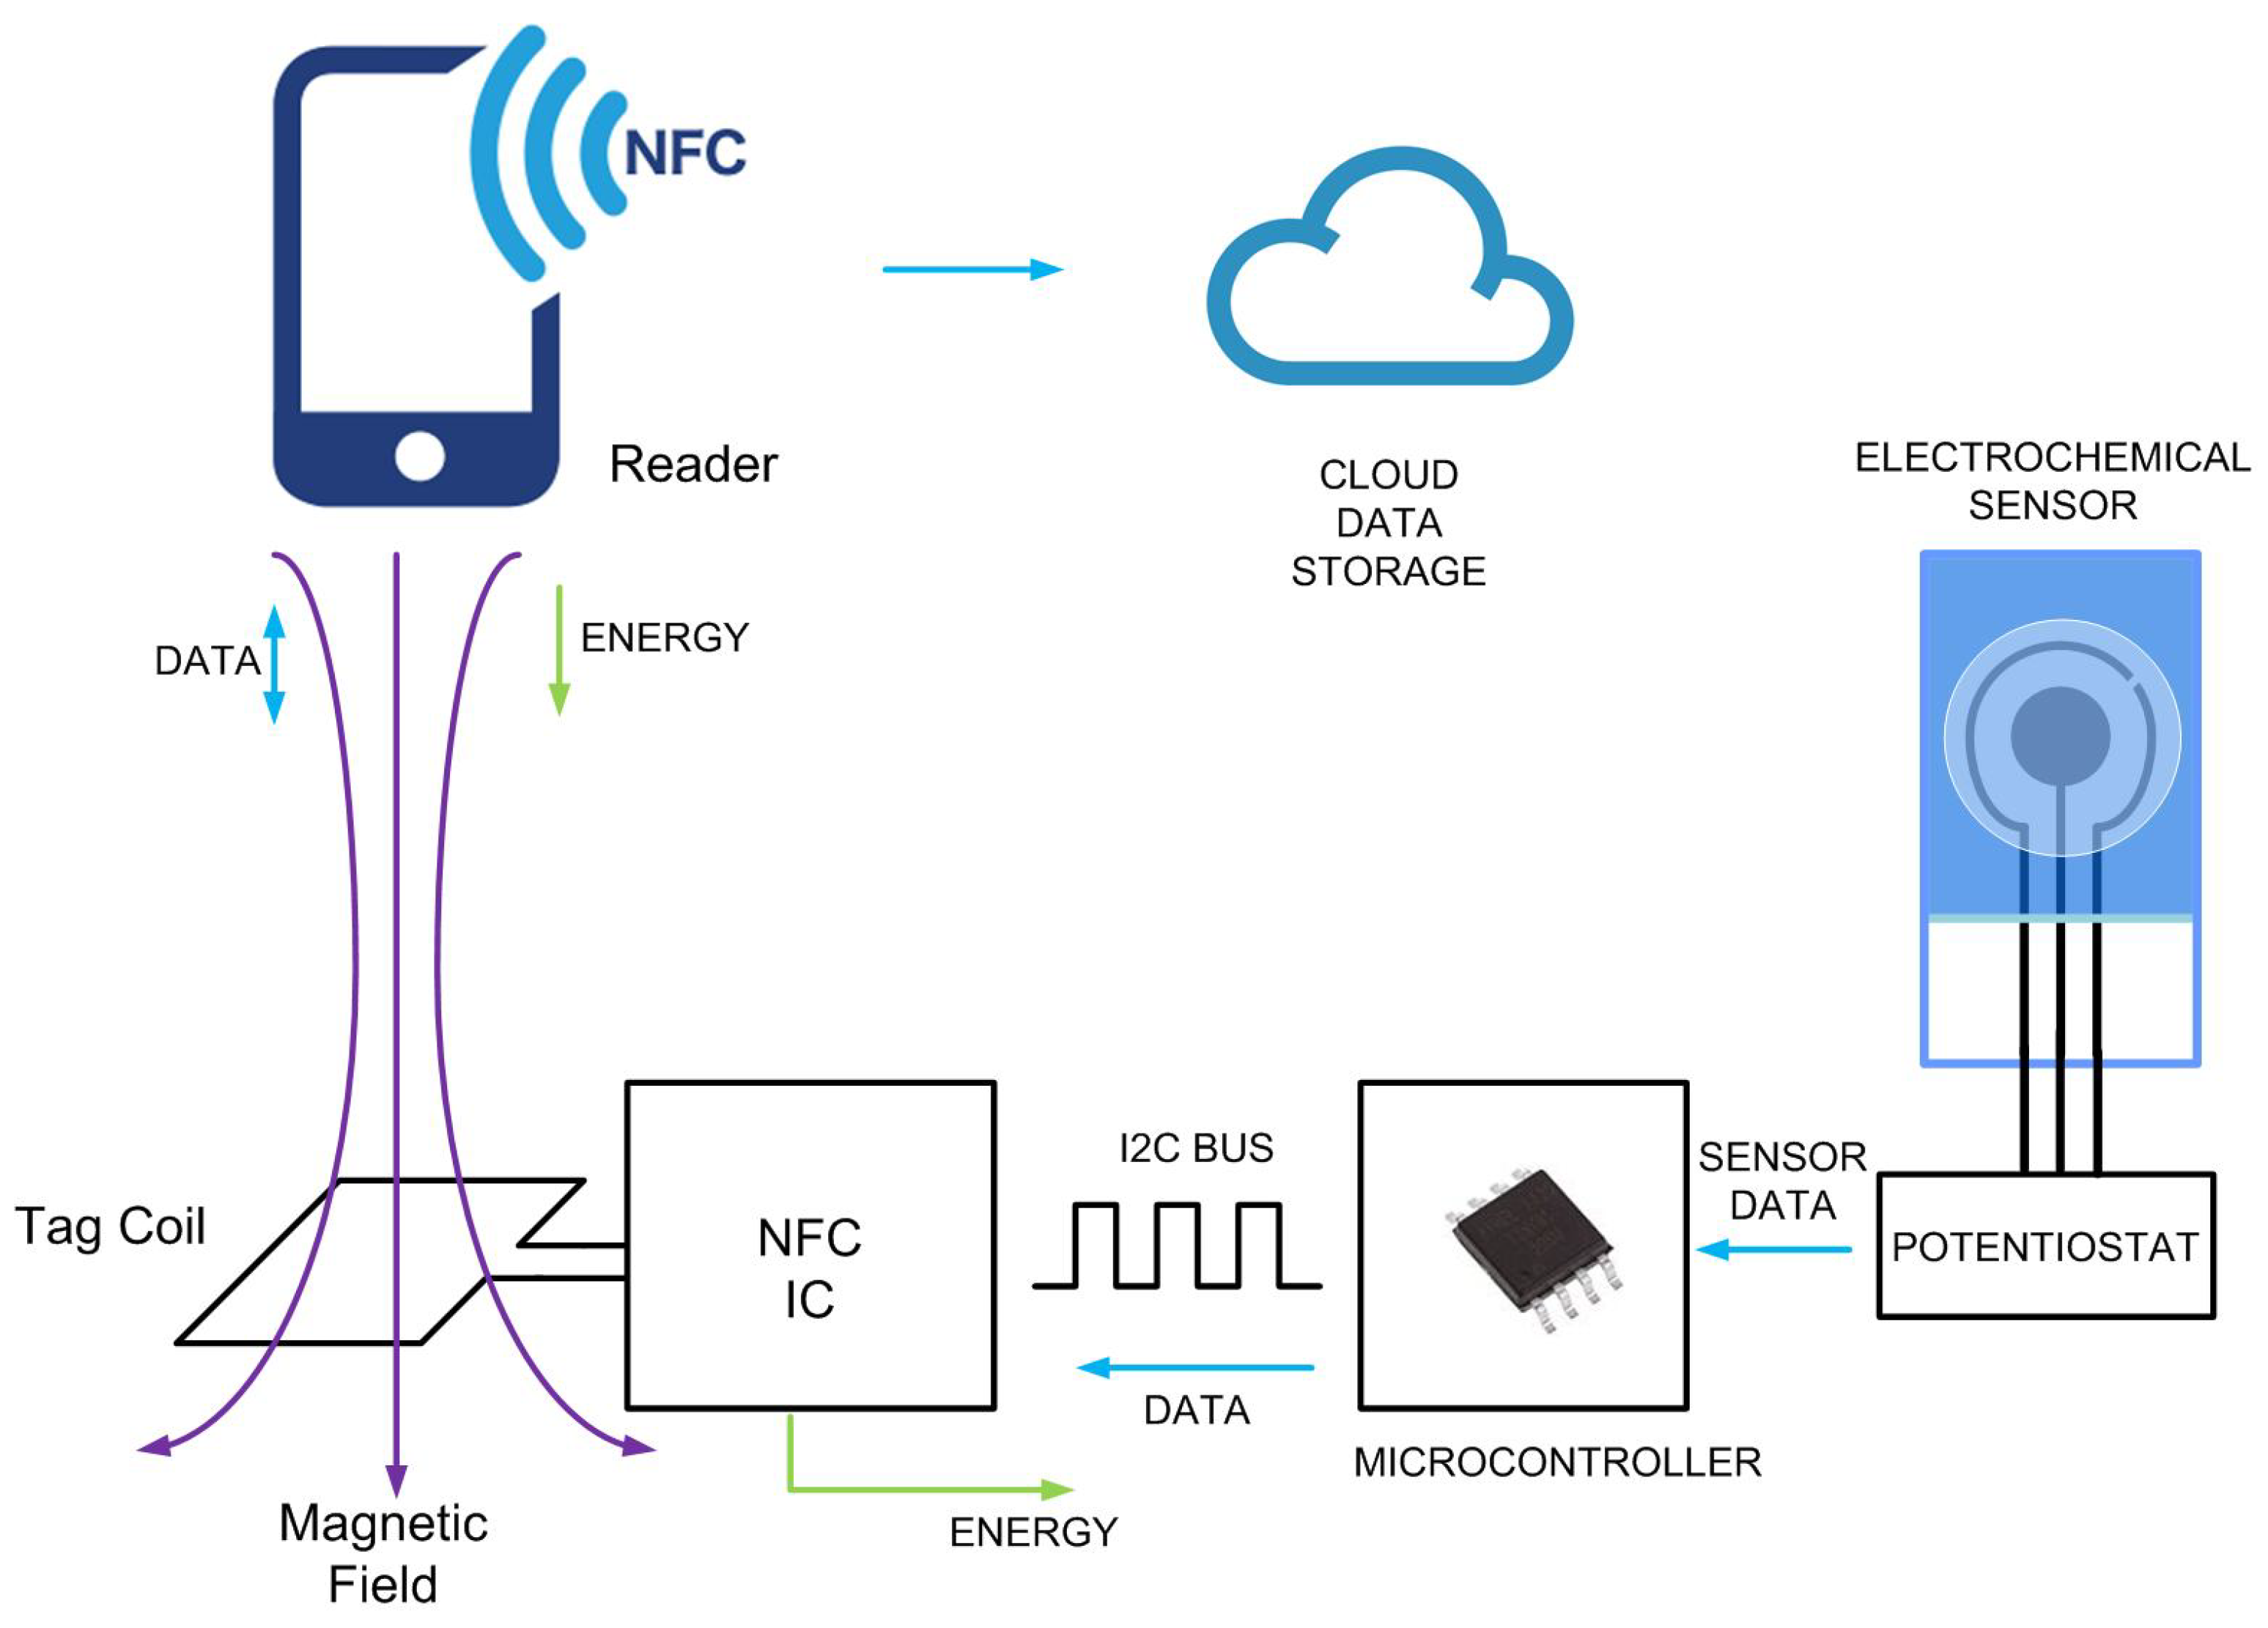 Sensors Free Full-Text | Battery-Less NFC Potentiostat for Electrochemical Point-of-Care Sensors Based on COTS Components